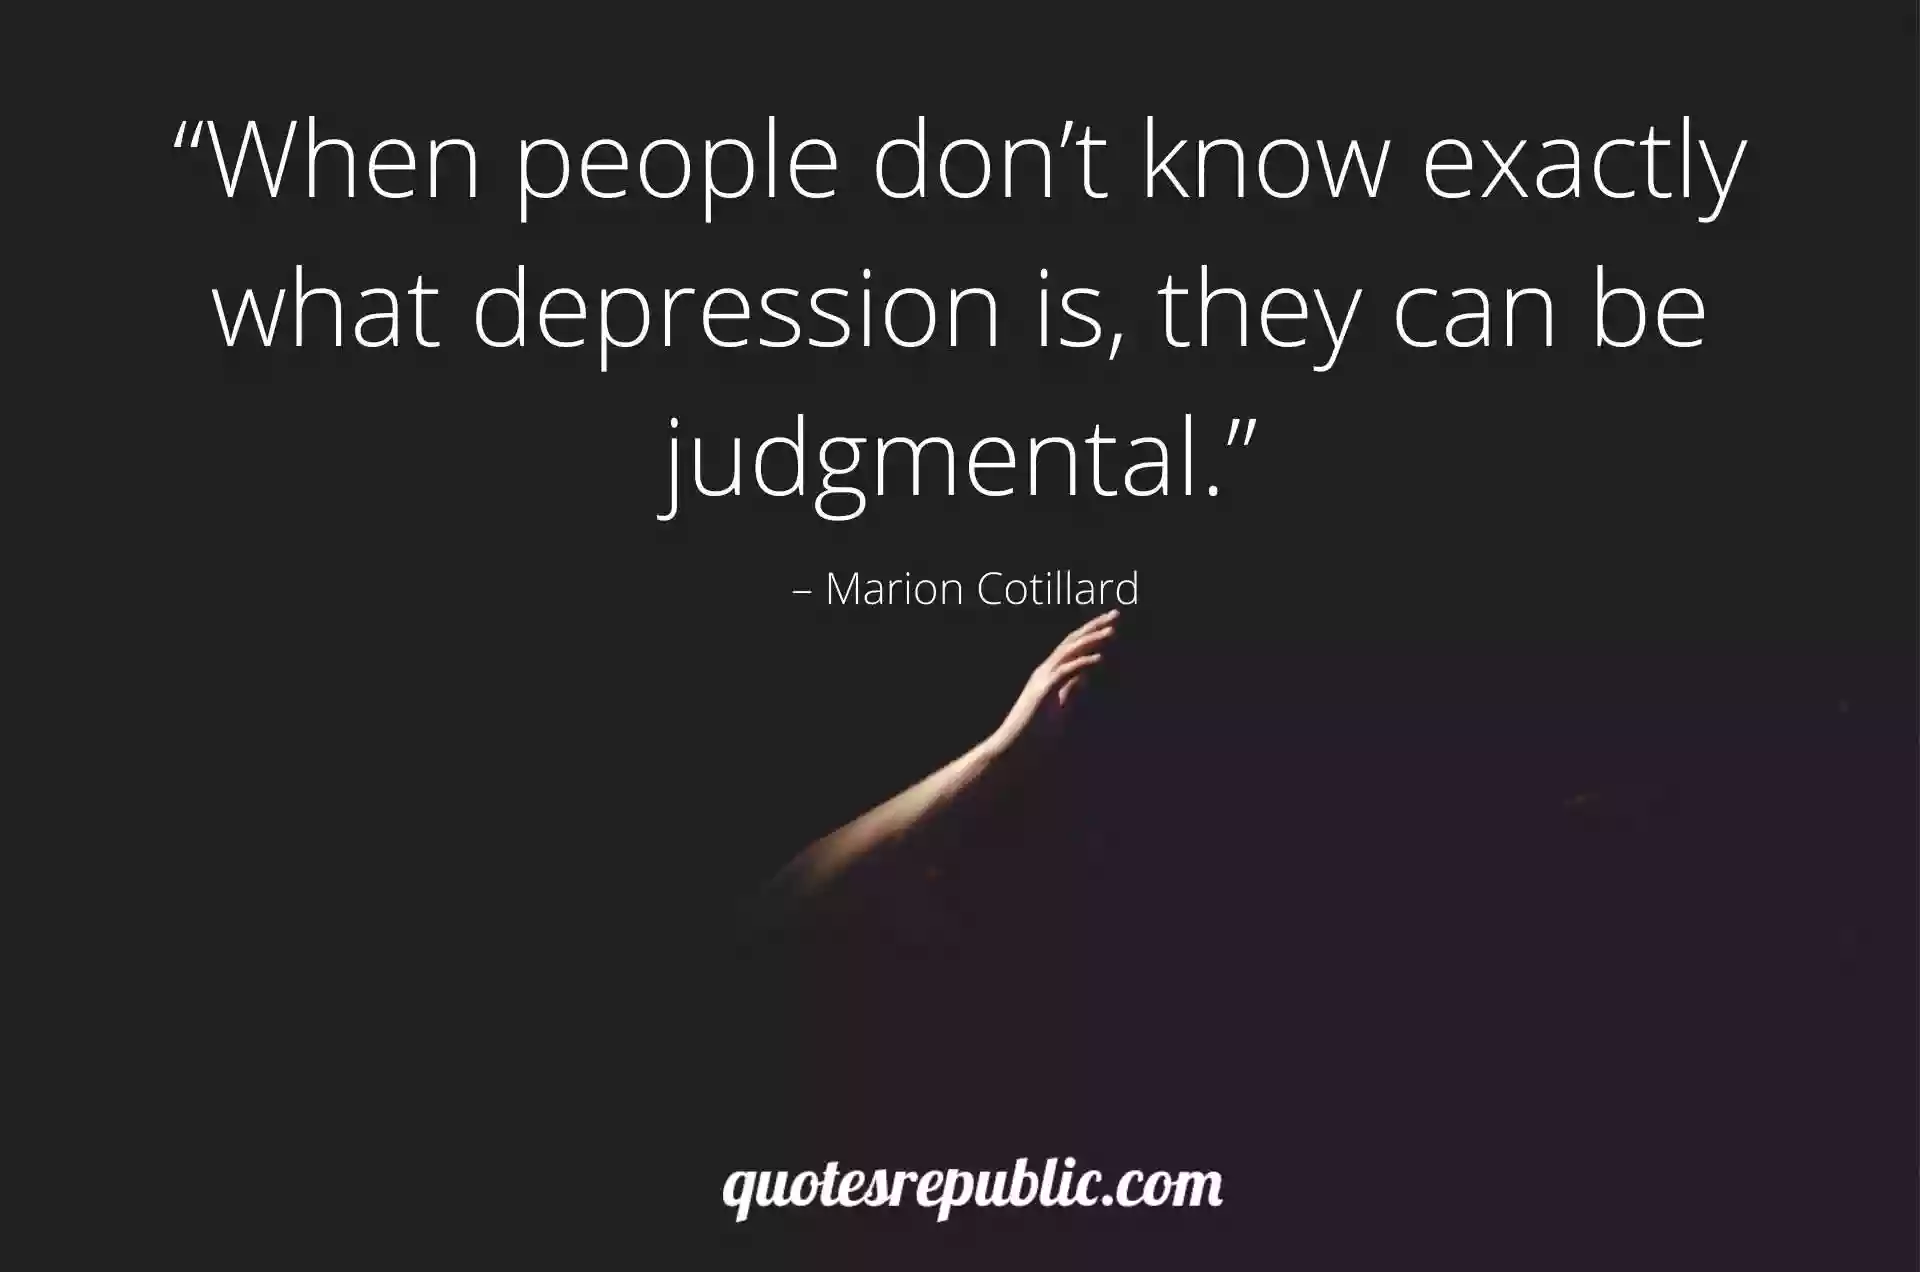 Top 40 Depression Motivational Quotes With Images - Republic Quote